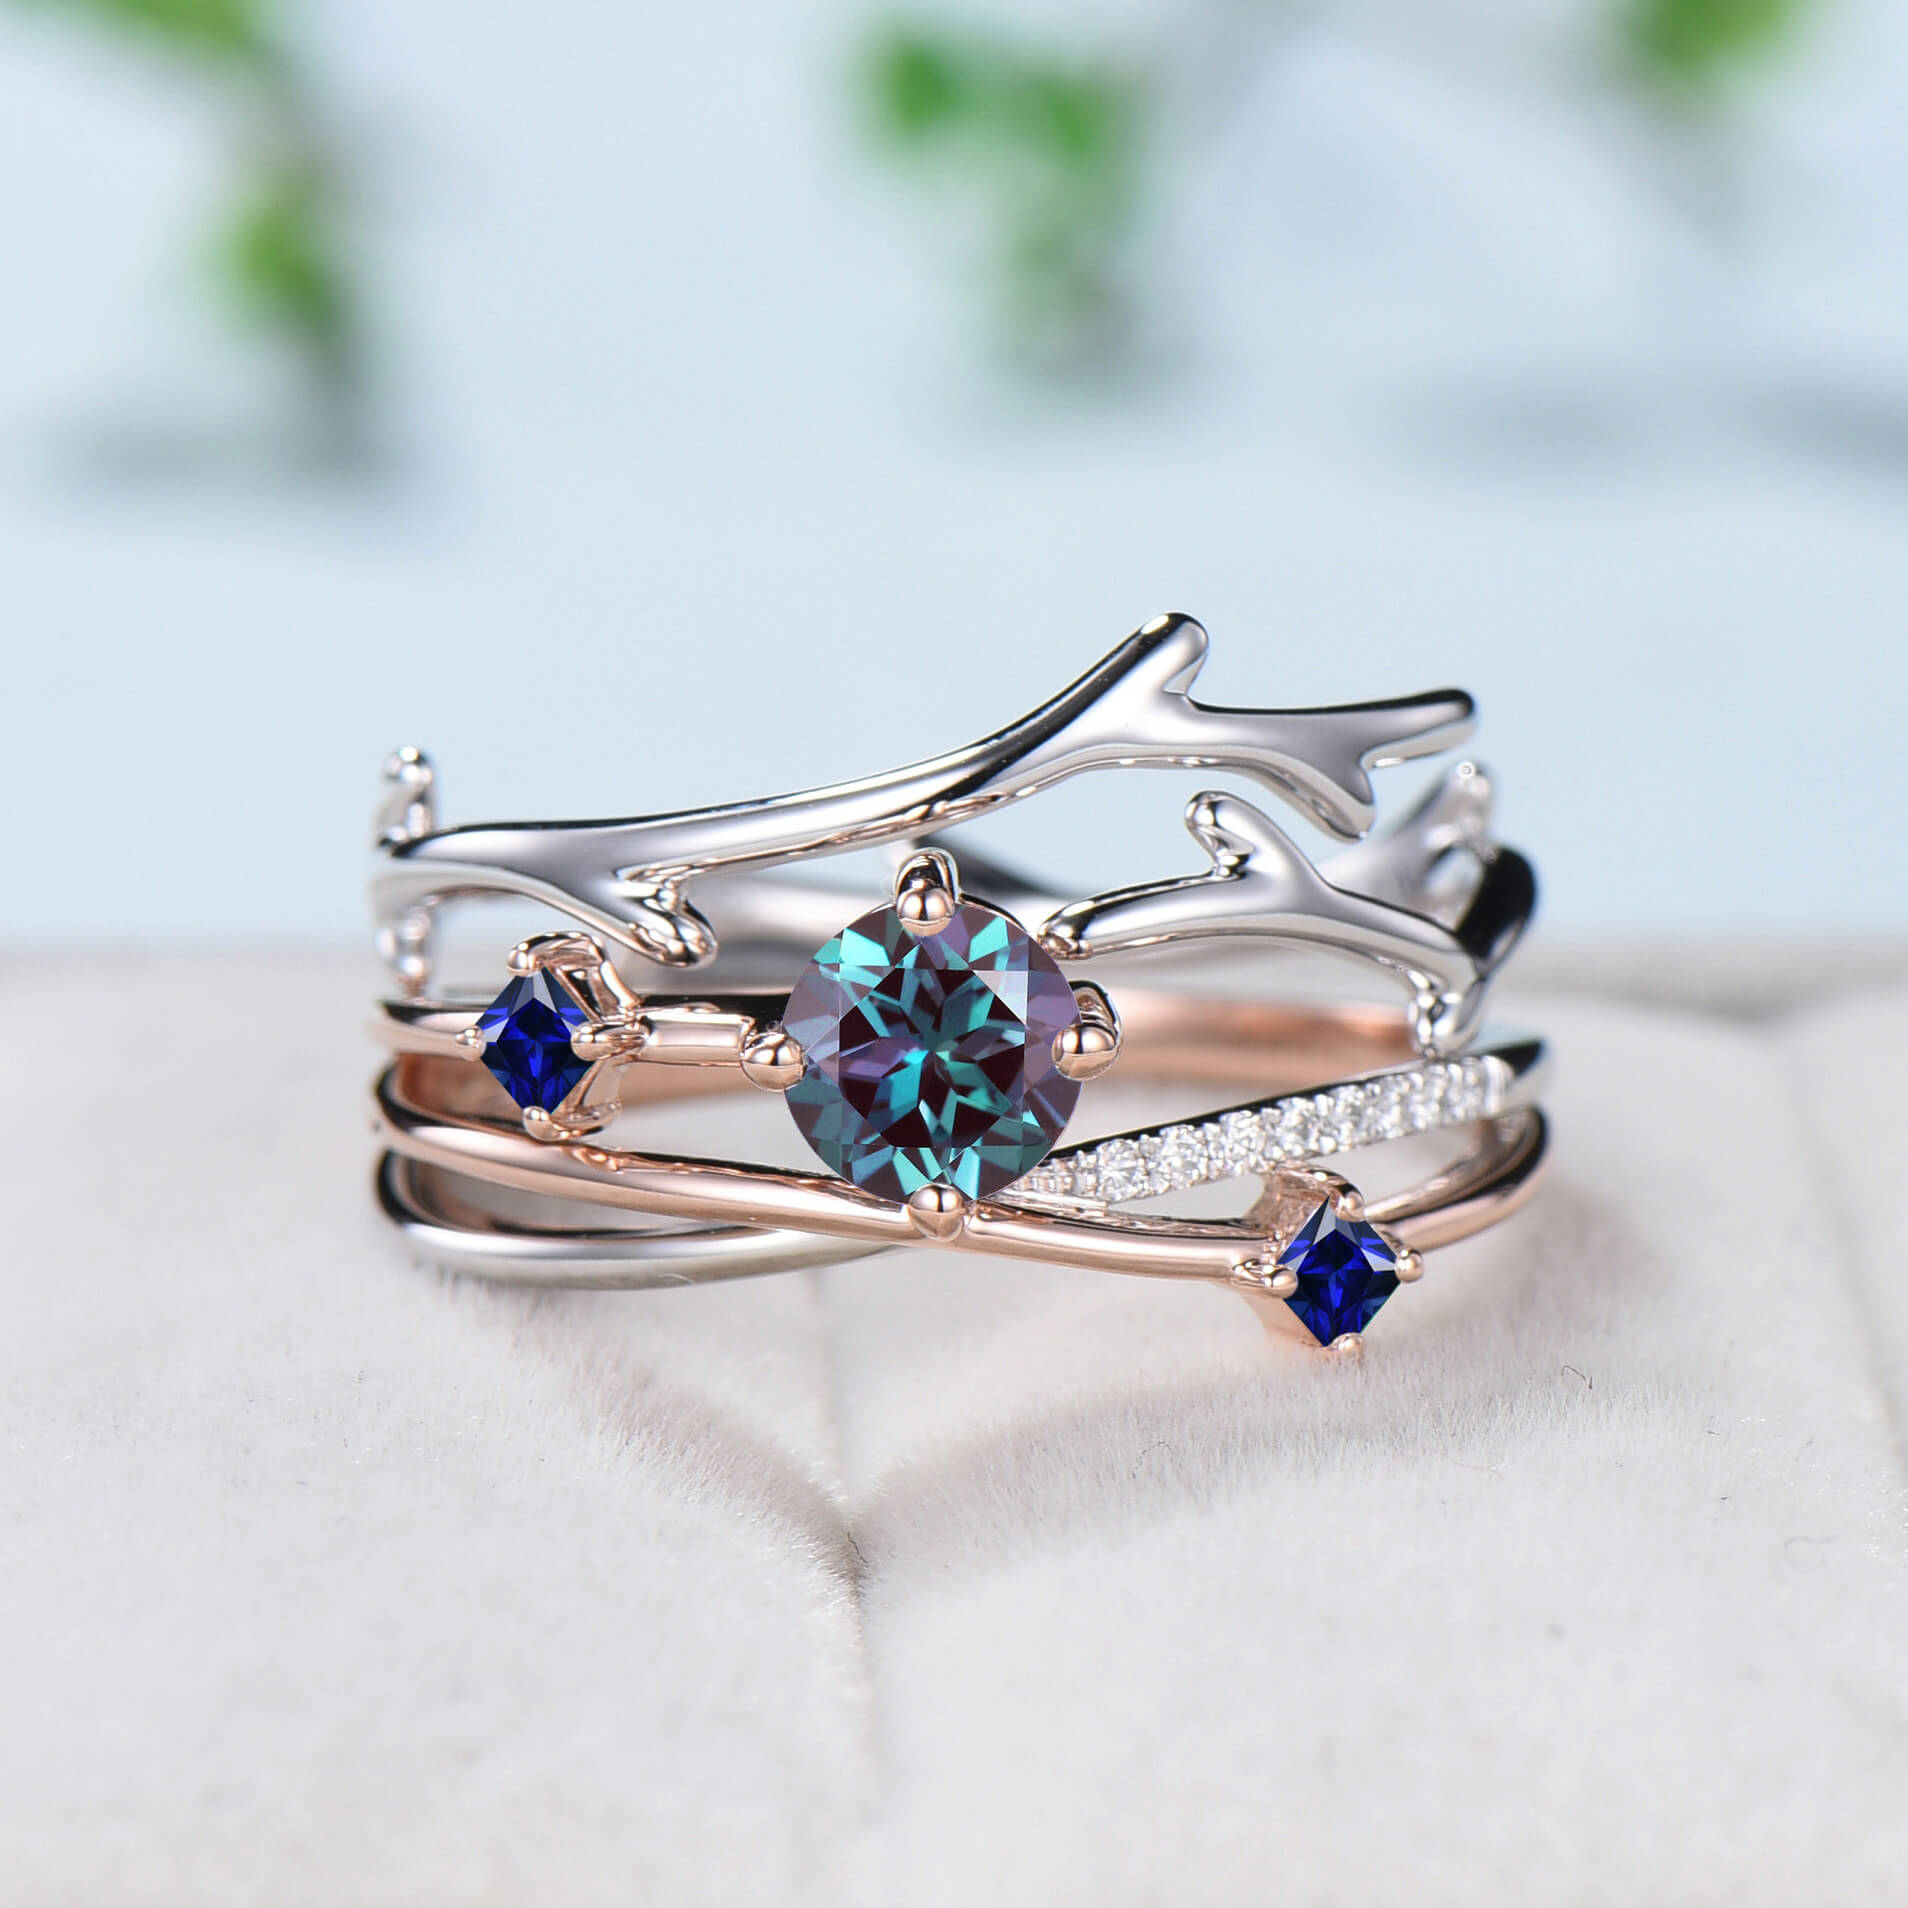 Two-tone gold Twig alexandrite engagement ring set dainty Leaf sapphire branch wedding set women Unique natural inspired anniversary gift - PENFINE